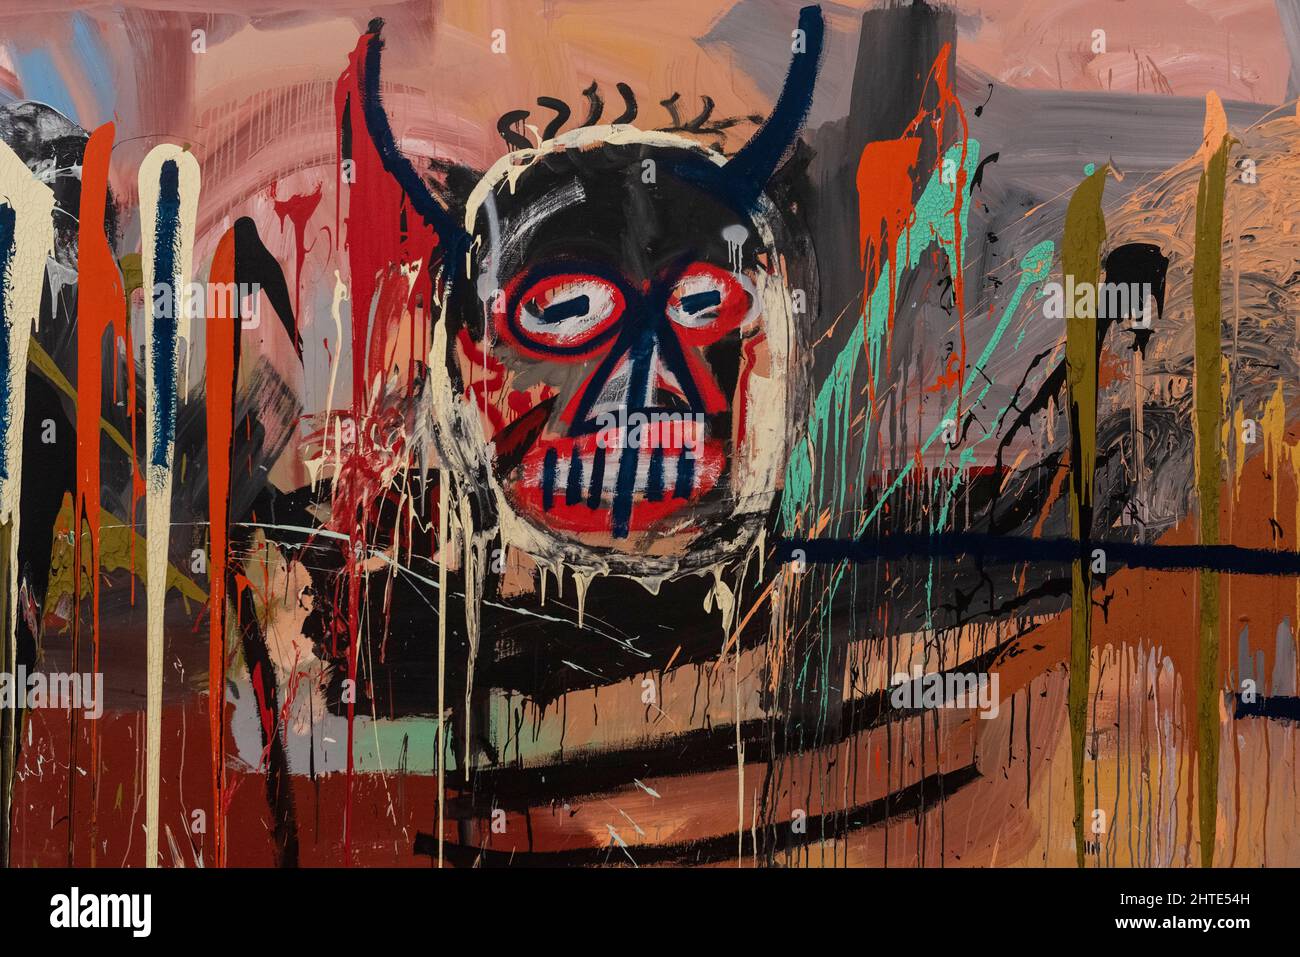 London, UK. 28 February 2022. Detail of “Untitled”, 1982, by Jean-Michel  Basquiat (Est. $70m), from the collection of Japanese art collector and  entrepreneur Yusaku Maezawa, unveiled at Phillips in London. The 16